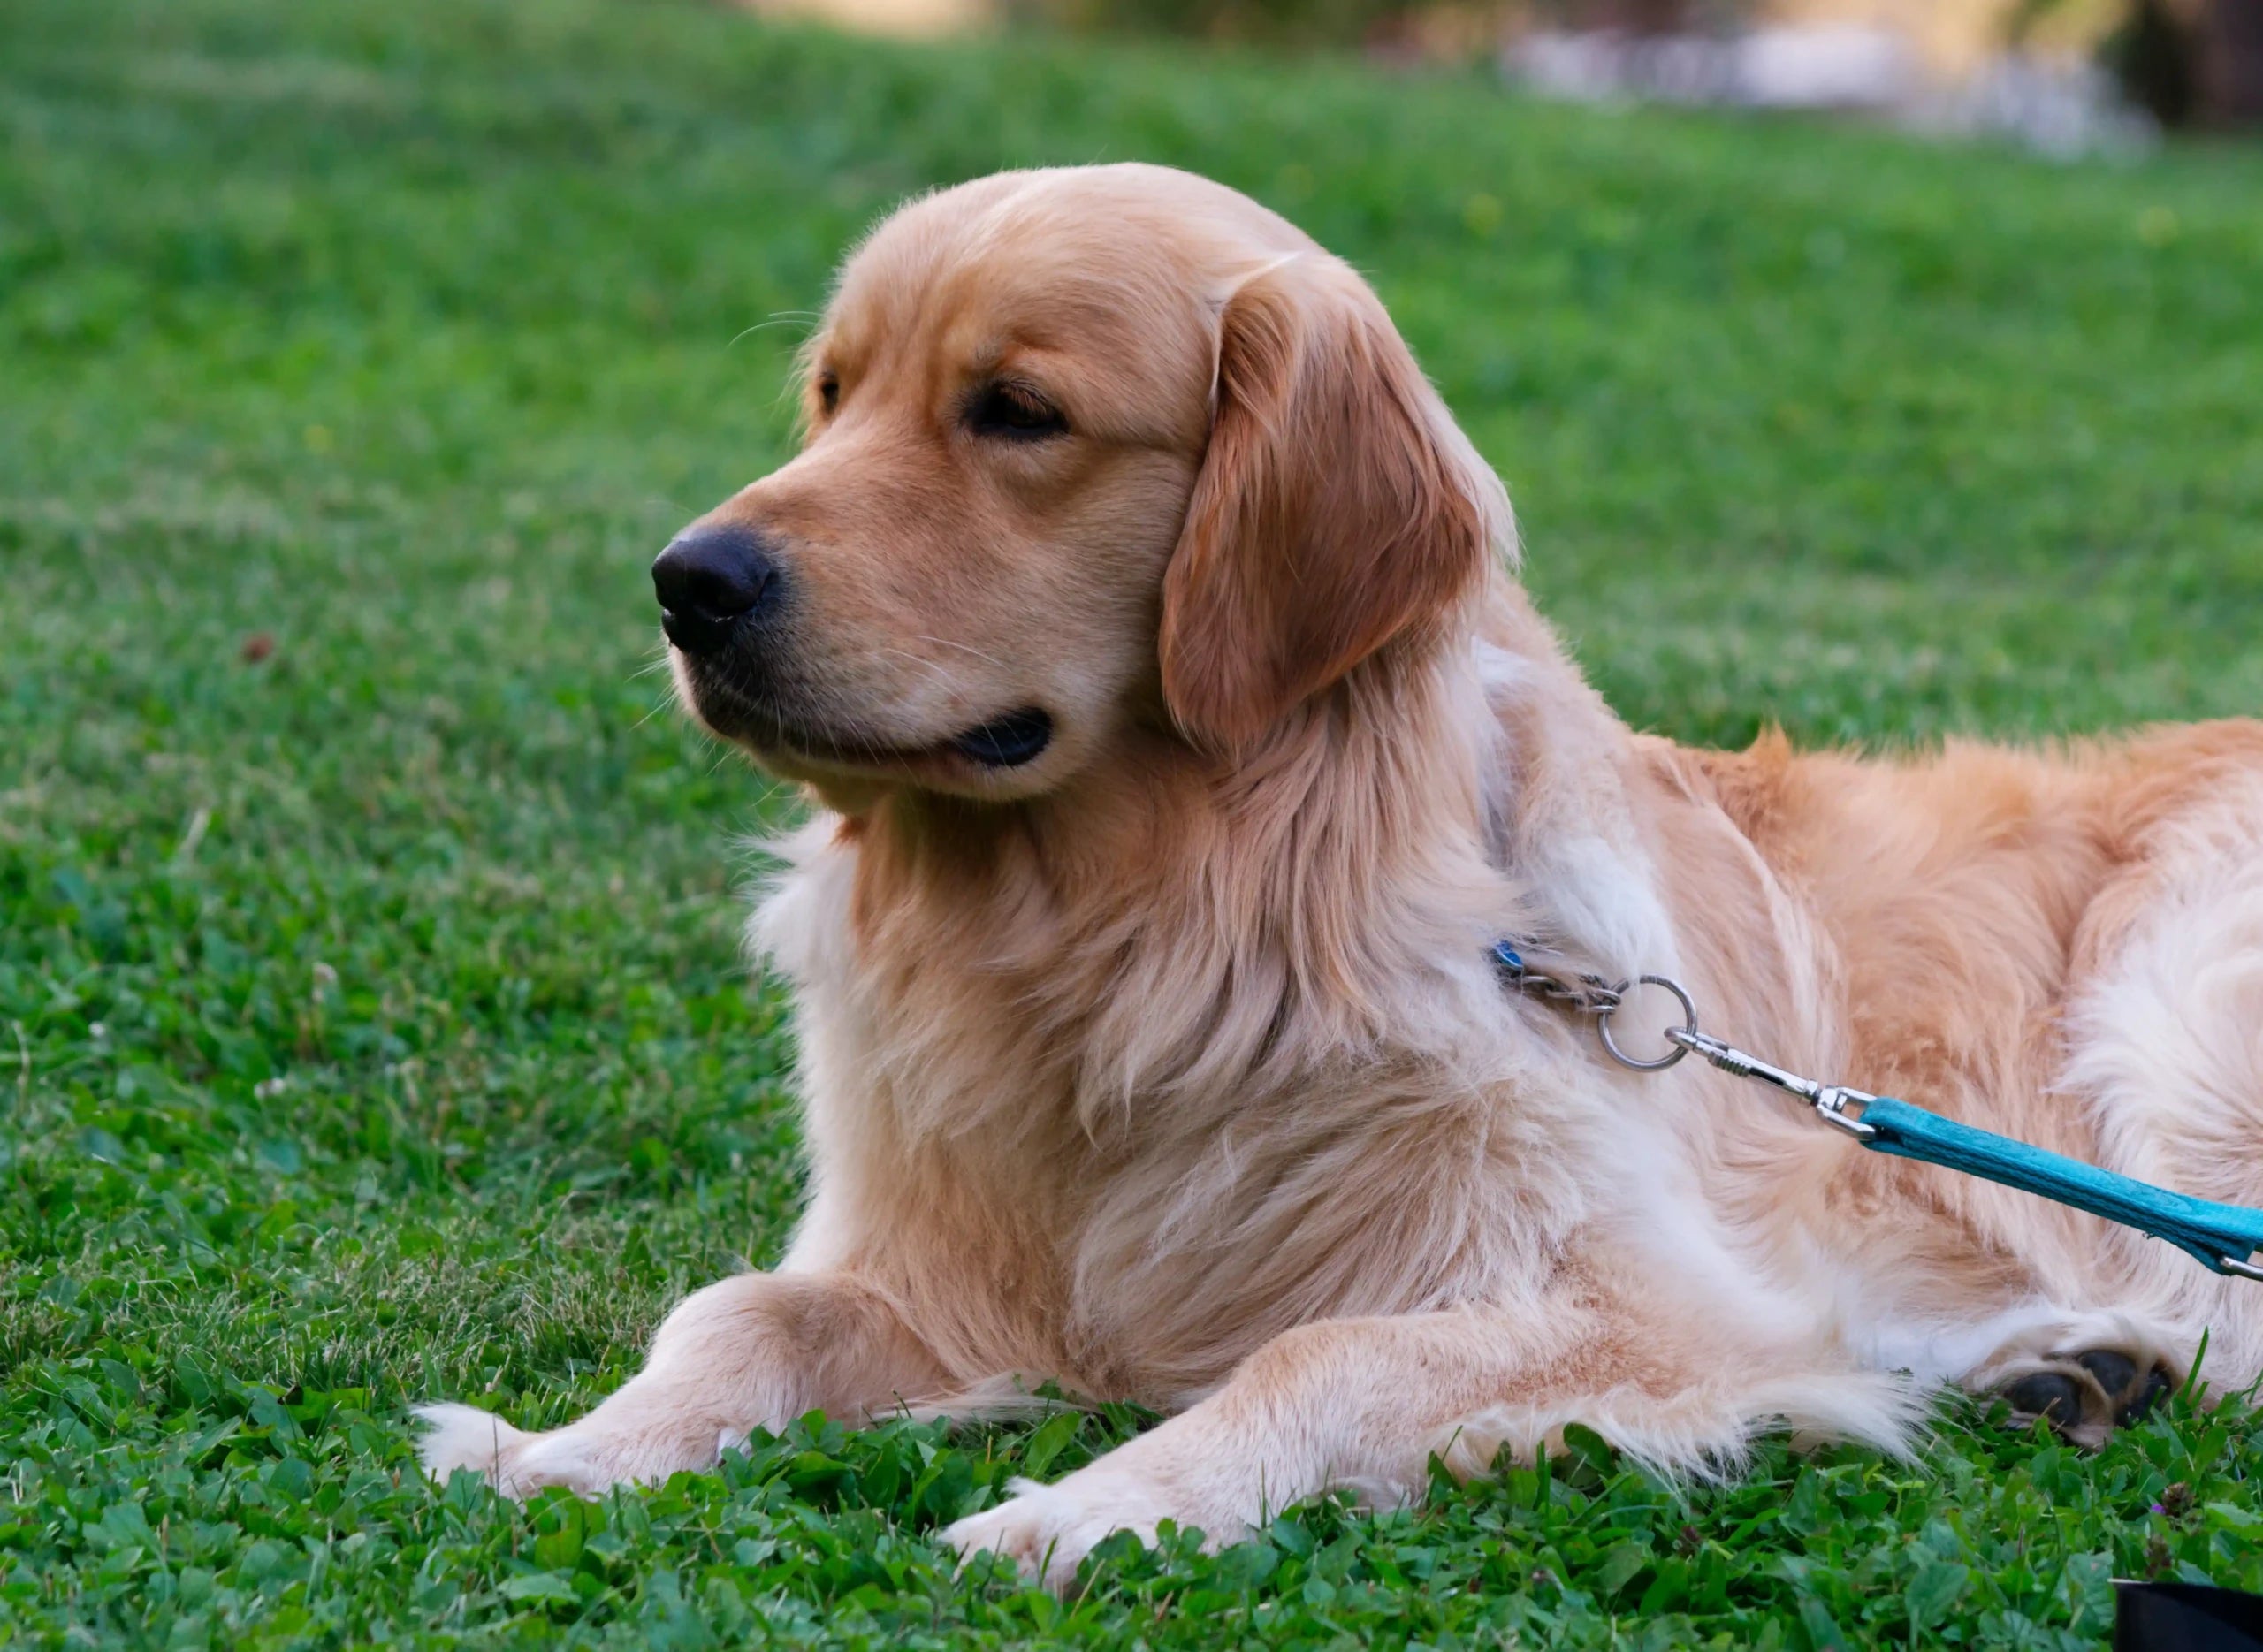 A golden retriever lying on the grass with a blue leash